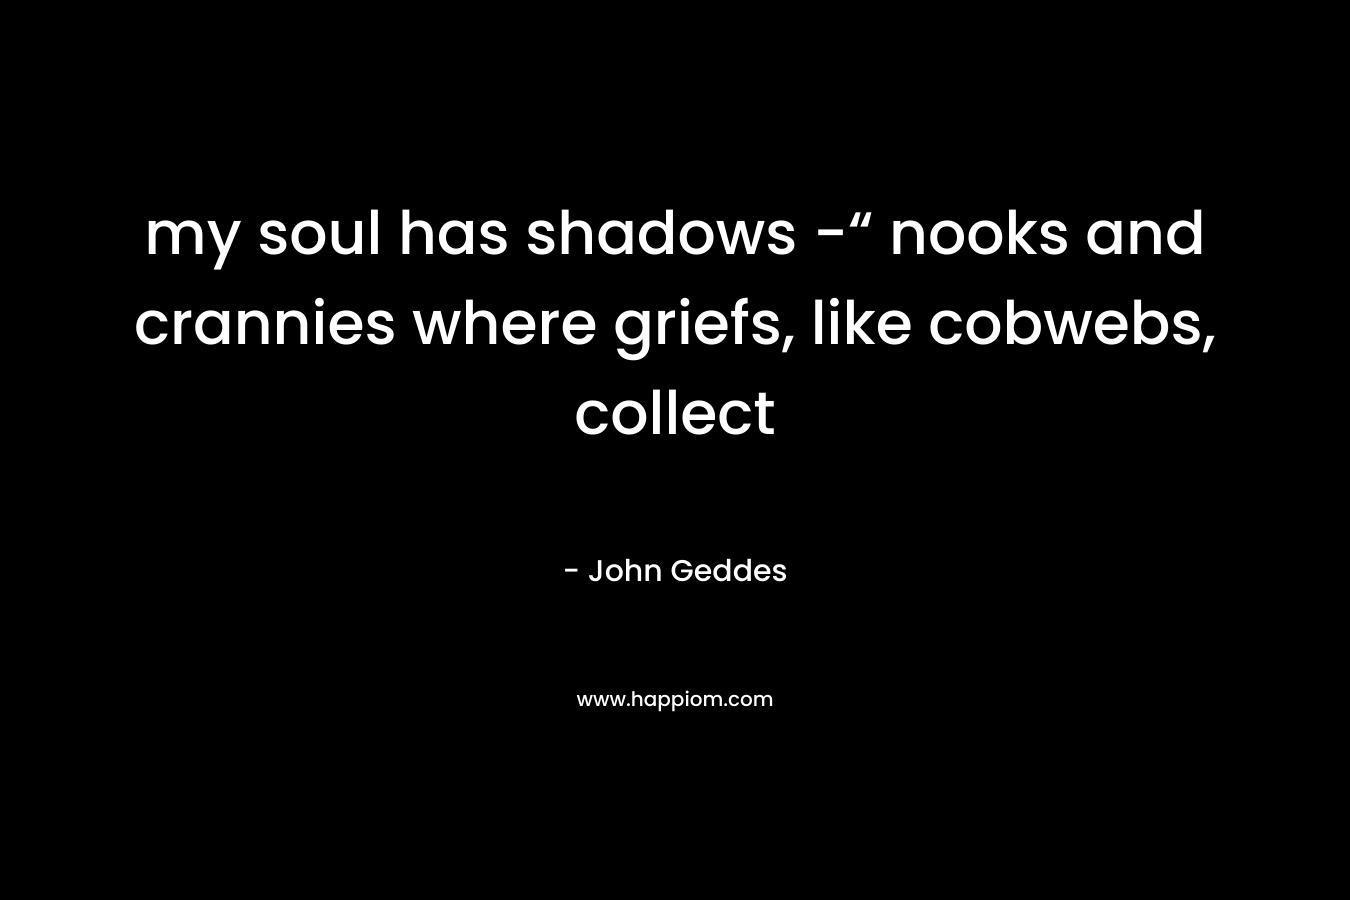 my soul has shadows -“ nooks and crannies where griefs, like cobwebs, collect